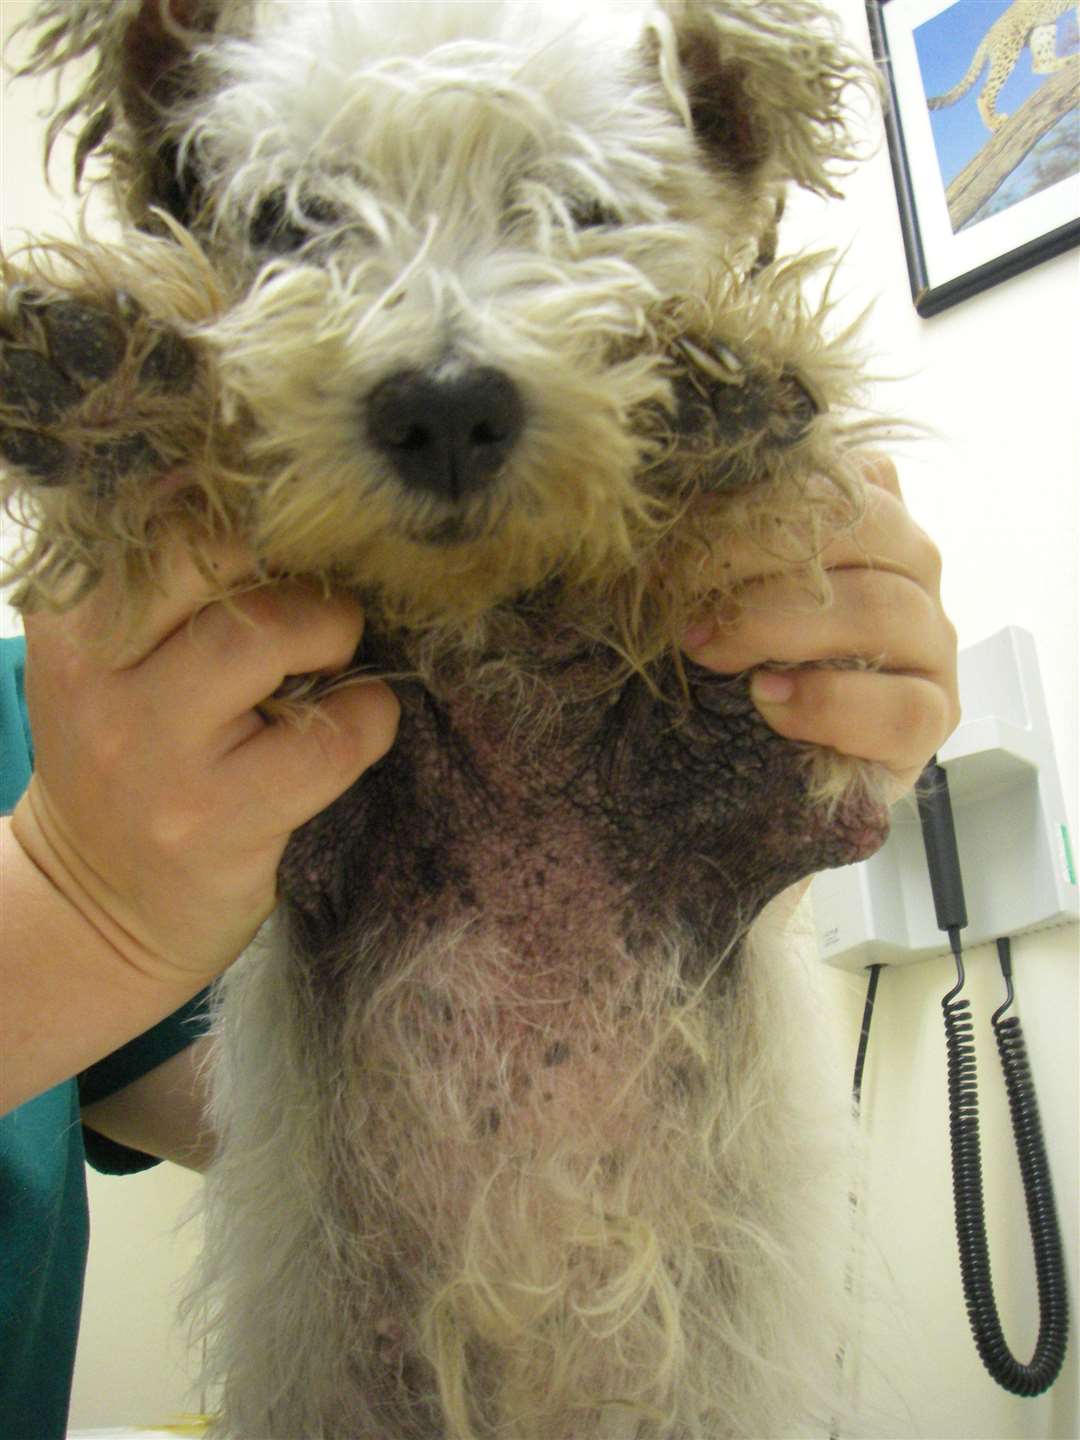 The neglected terrier. Picture: RSPCA